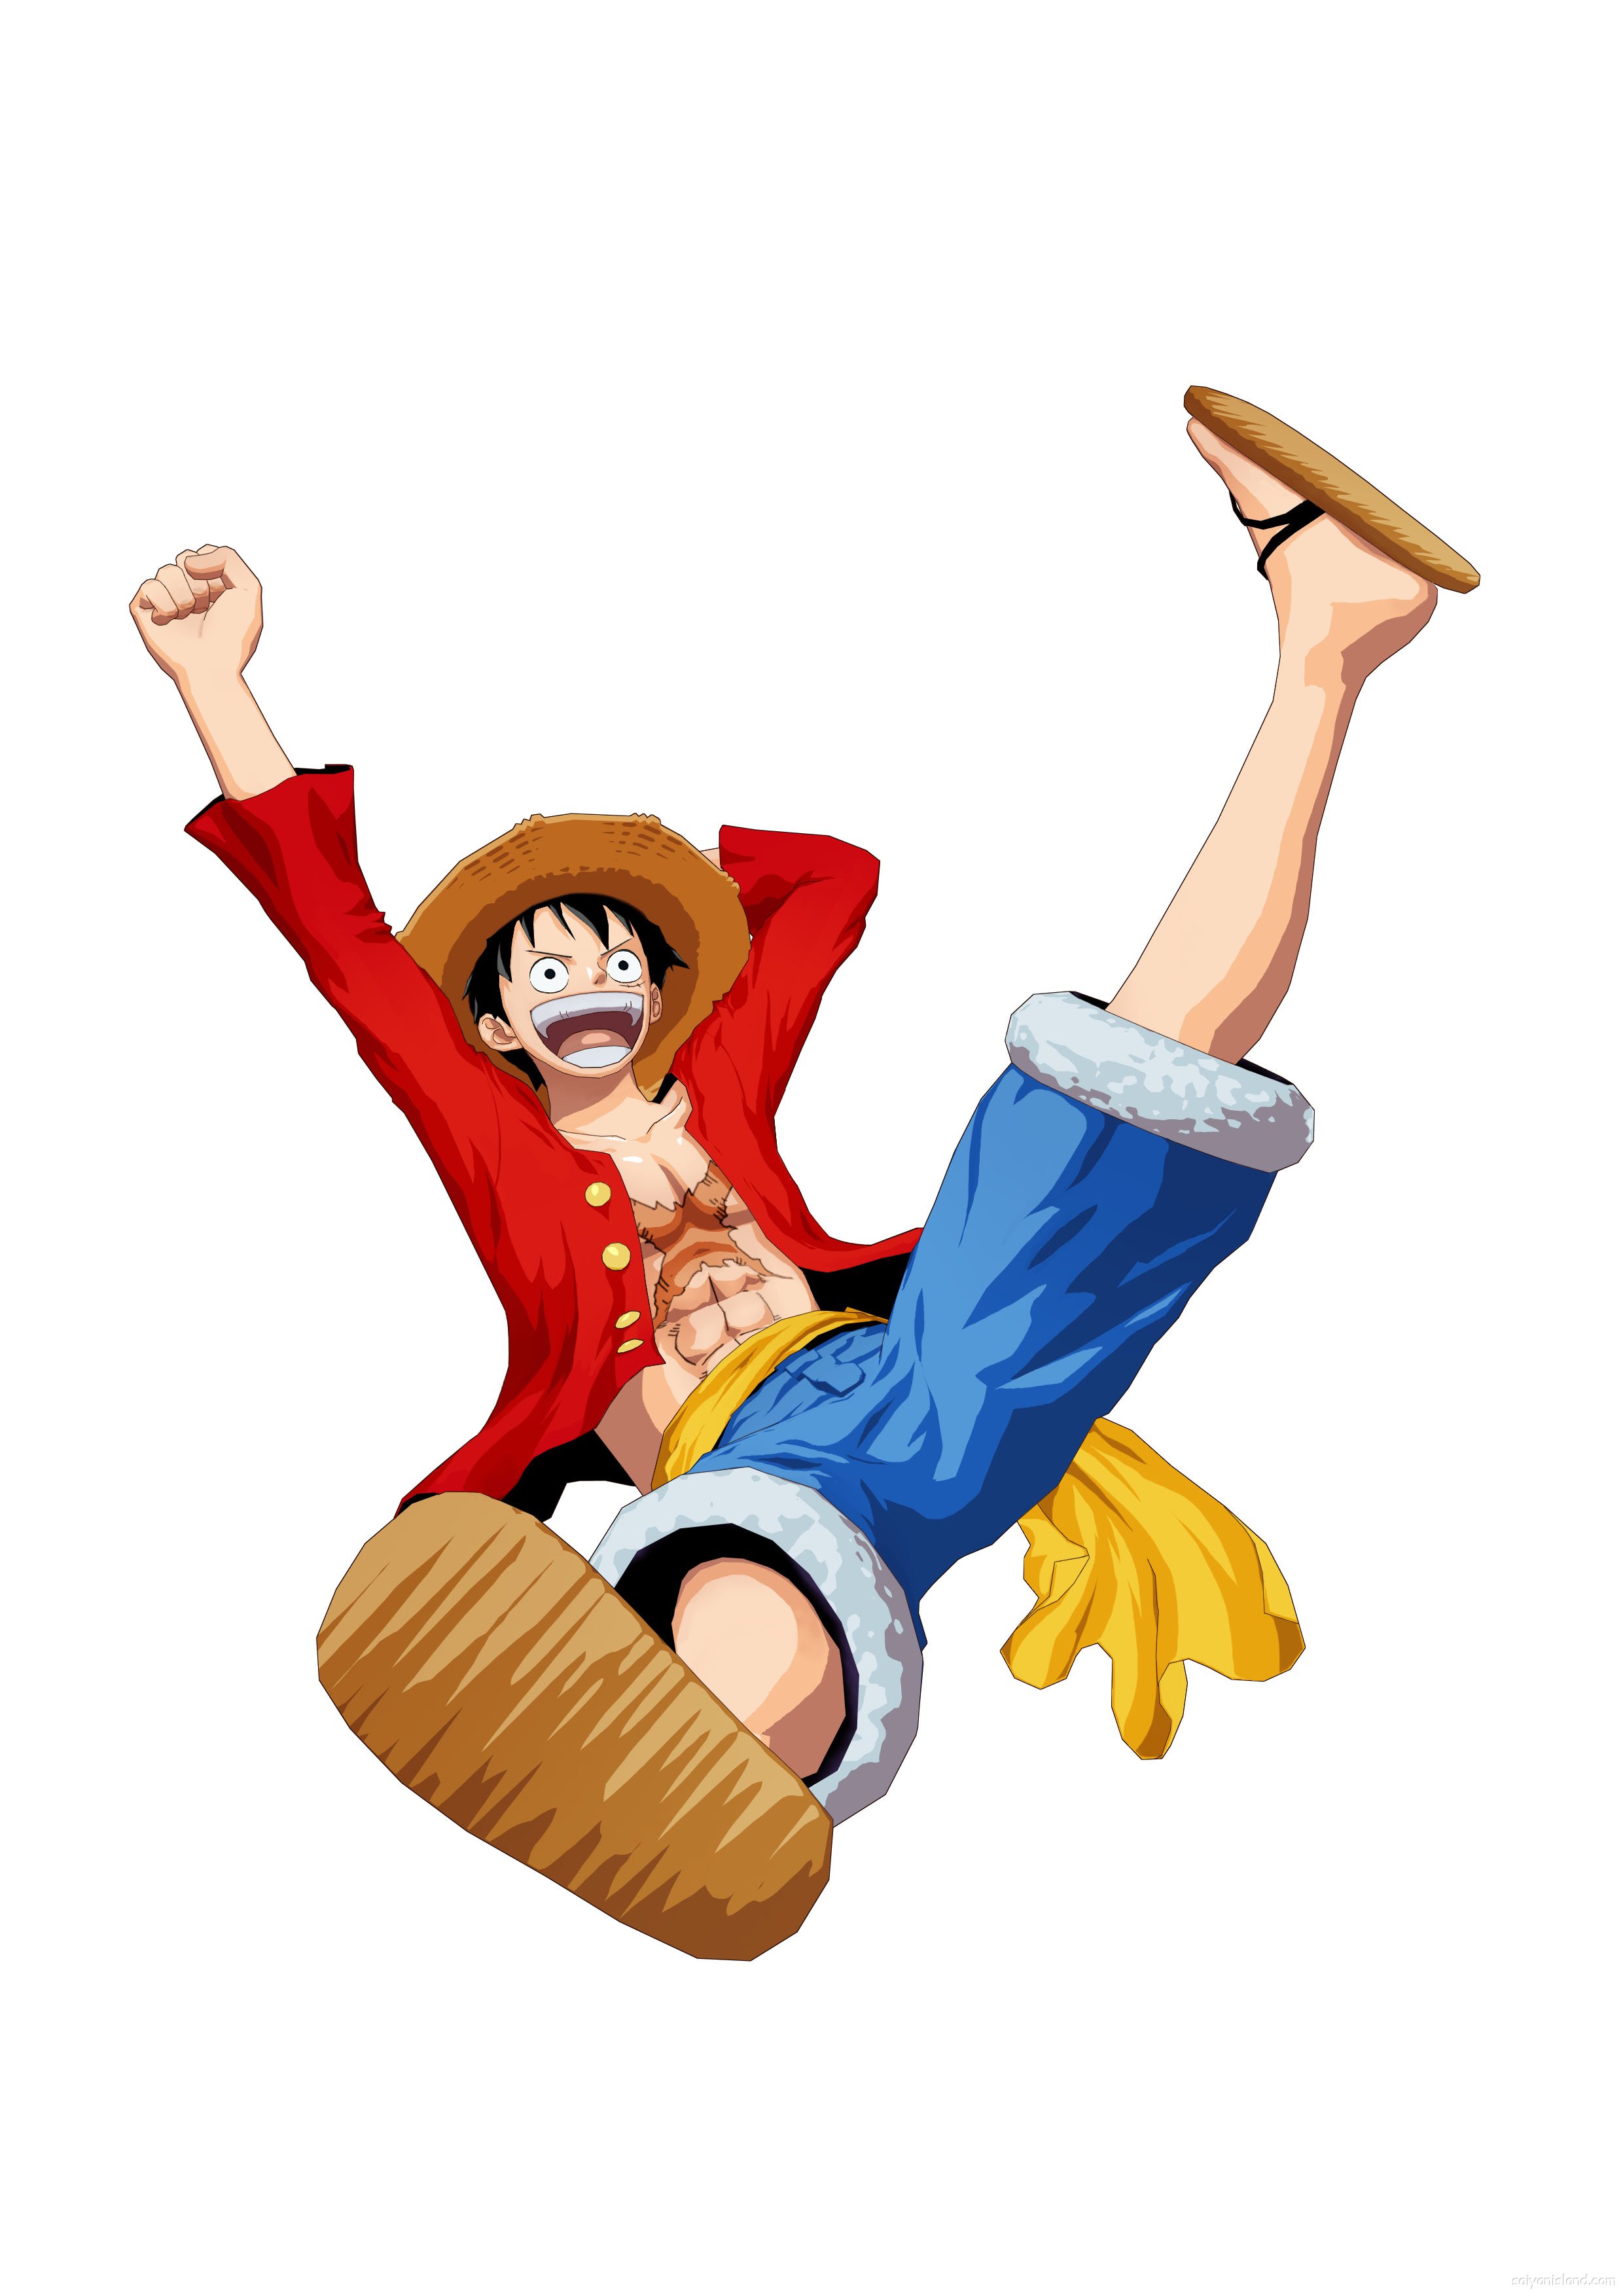 one piece games for mac free